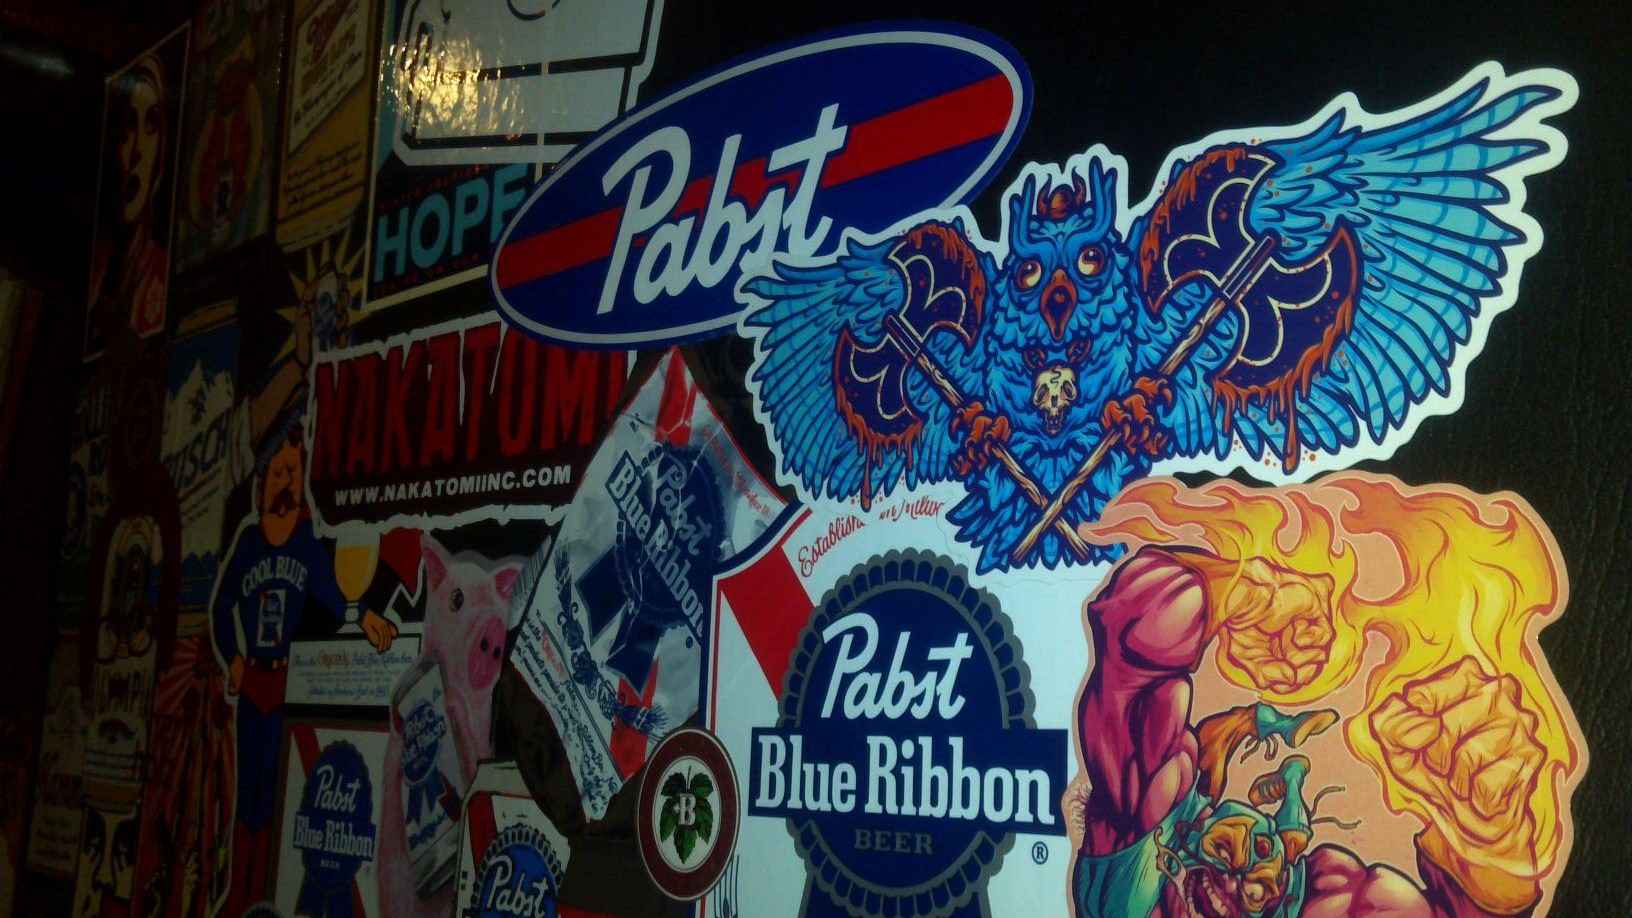 sticker of the month club custom stickers by jared moraitis of beastpop and mr gauky